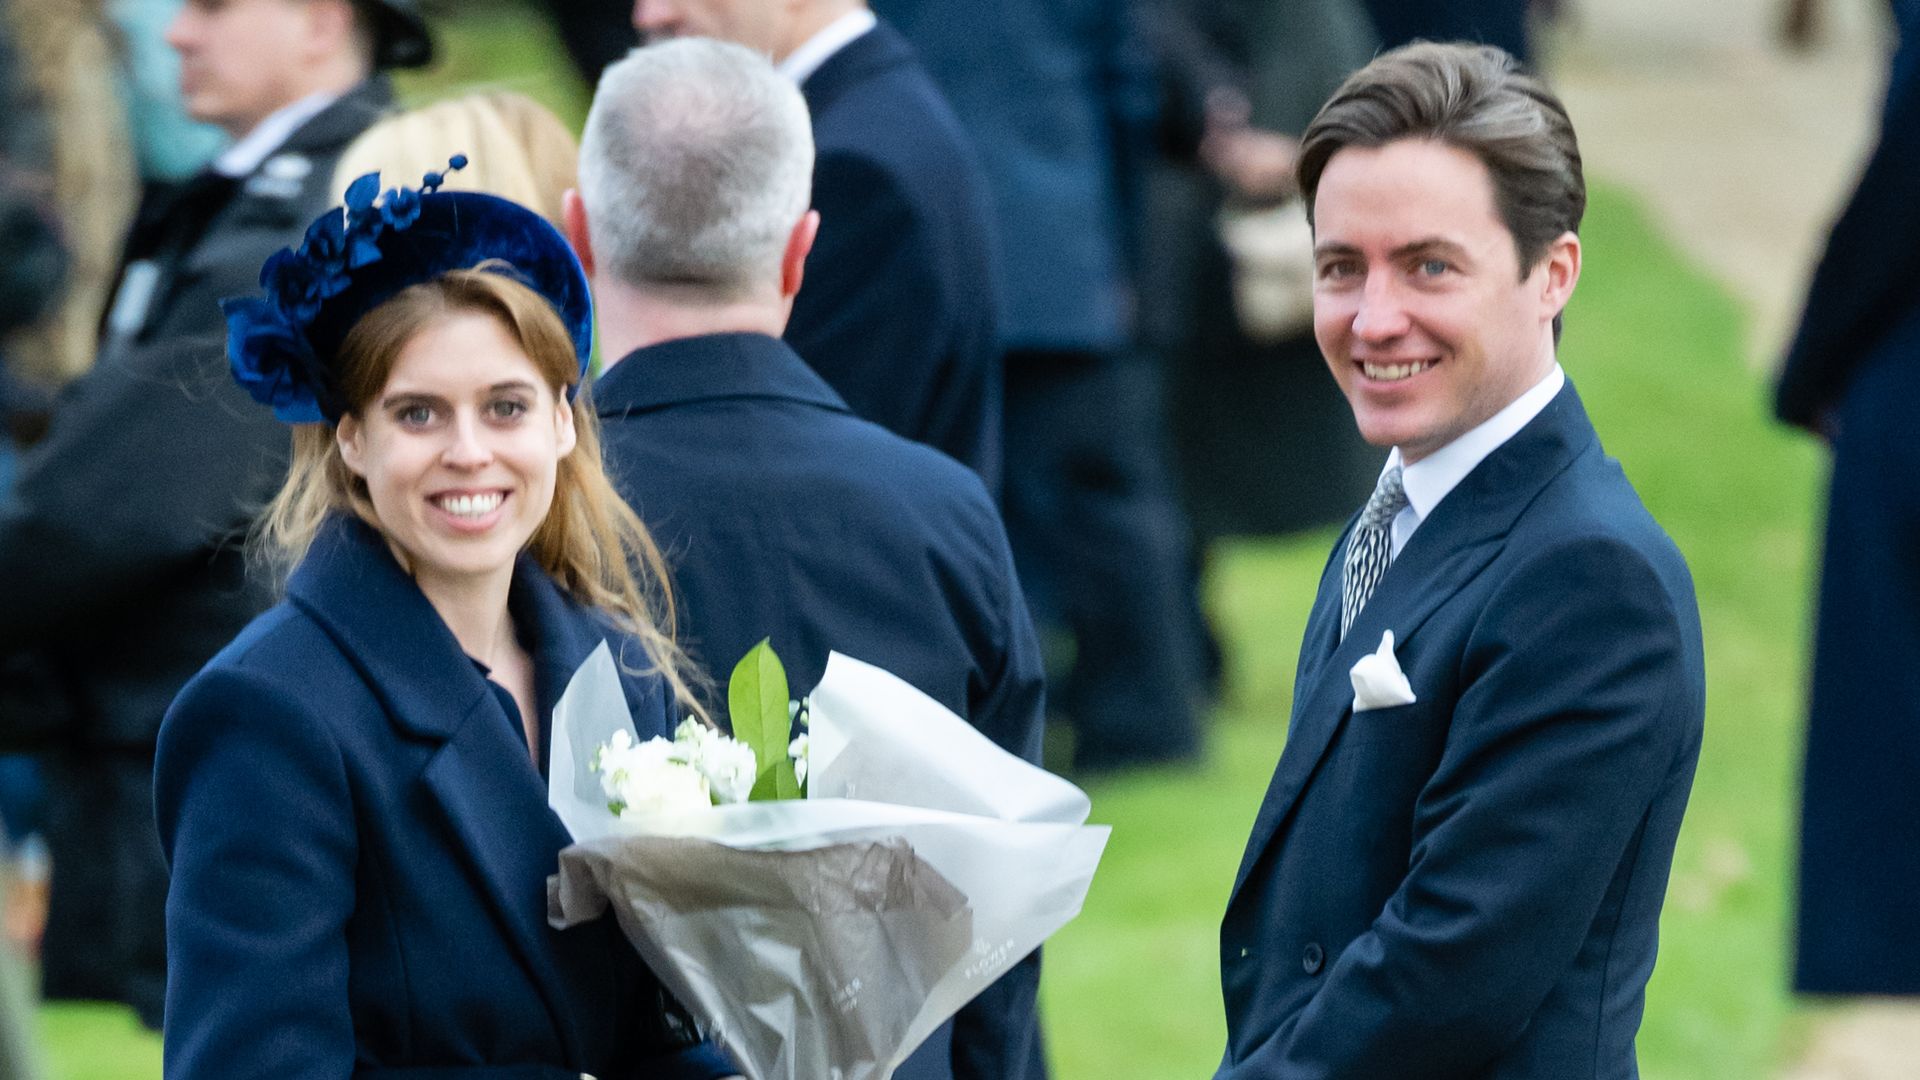 Princess Beatrice and Edoardo Mapelli Mozzi attended without their daughter Sienna